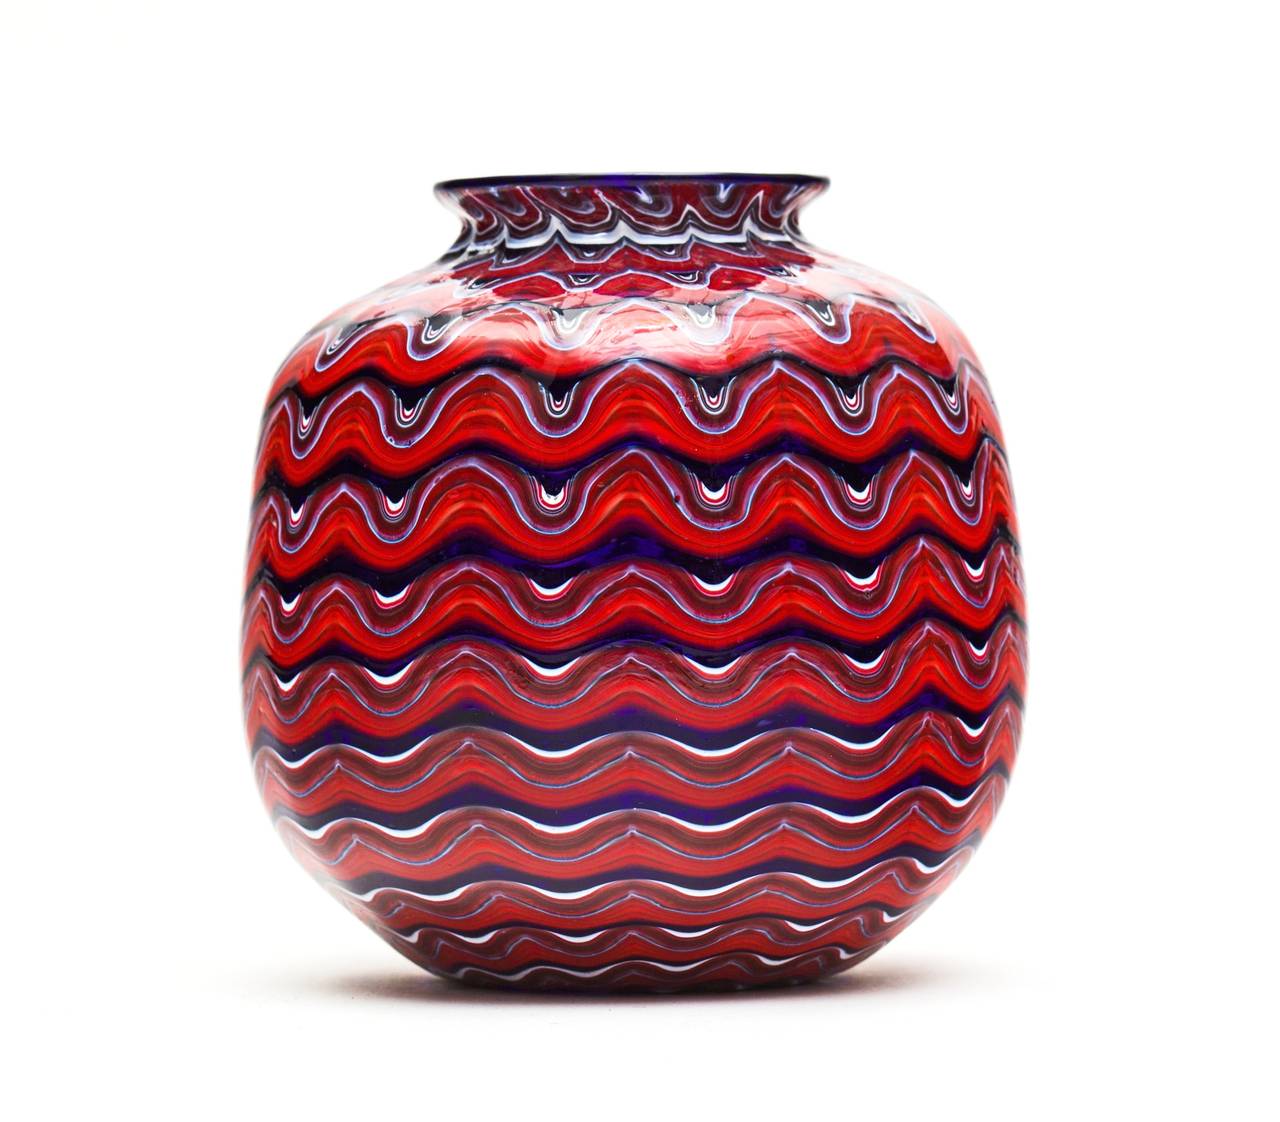 Superb European hand-painted red, white and cobalt blue Art Deco glass vase, unsigned, circa 1940s. A small gem beautifully executed.